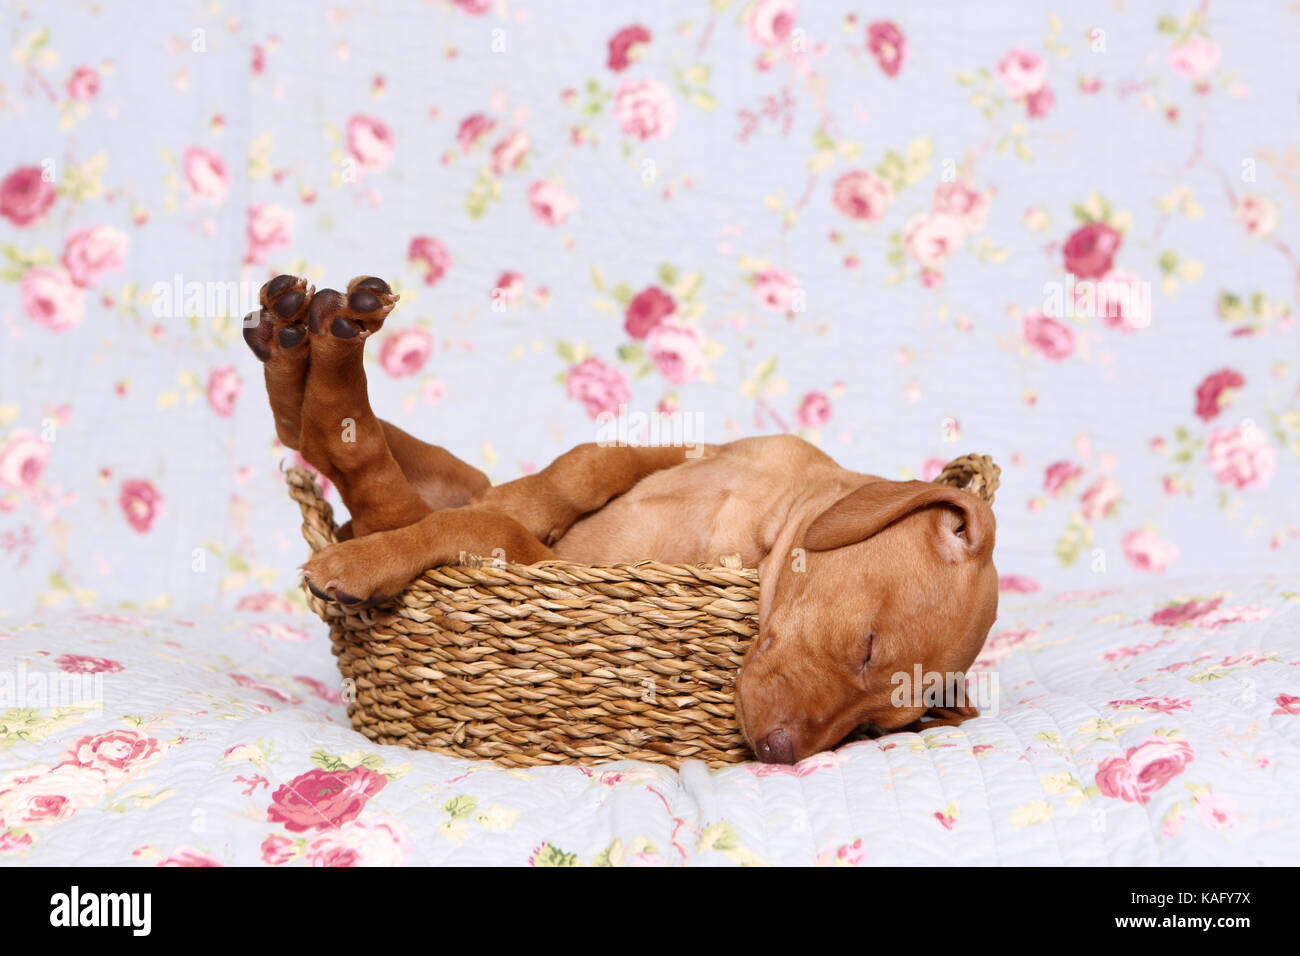 Vizsla. Puppy (6 weeks old) sleeping on a blue blanket with rose flower print. Germany Stock Photo